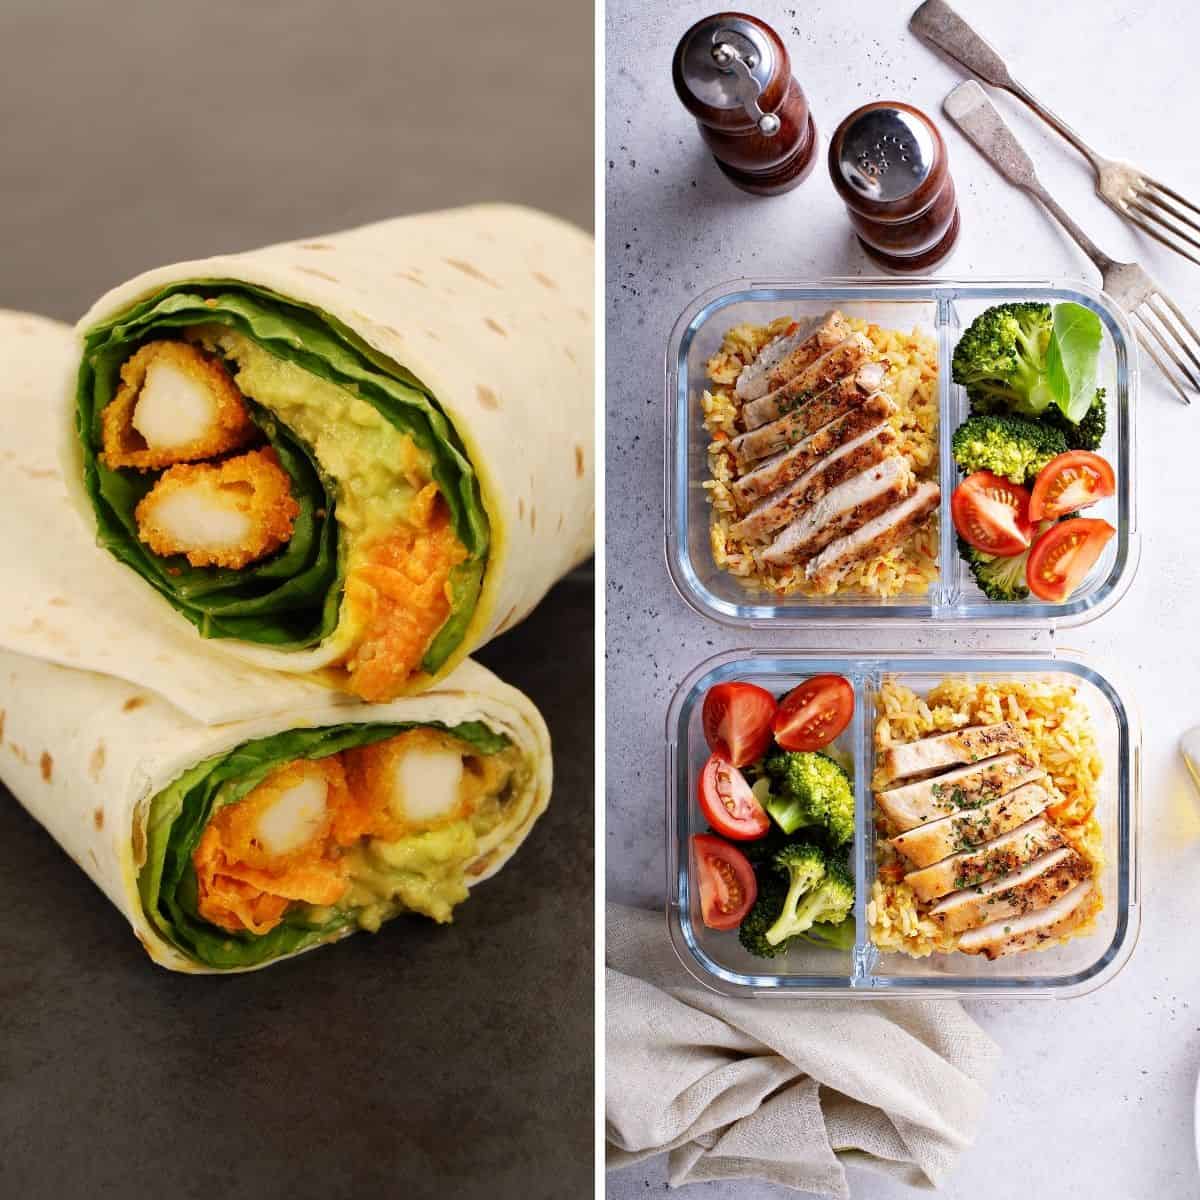 pesto chicken wraps and teriyaki rice bowls served as 500 calorie meals